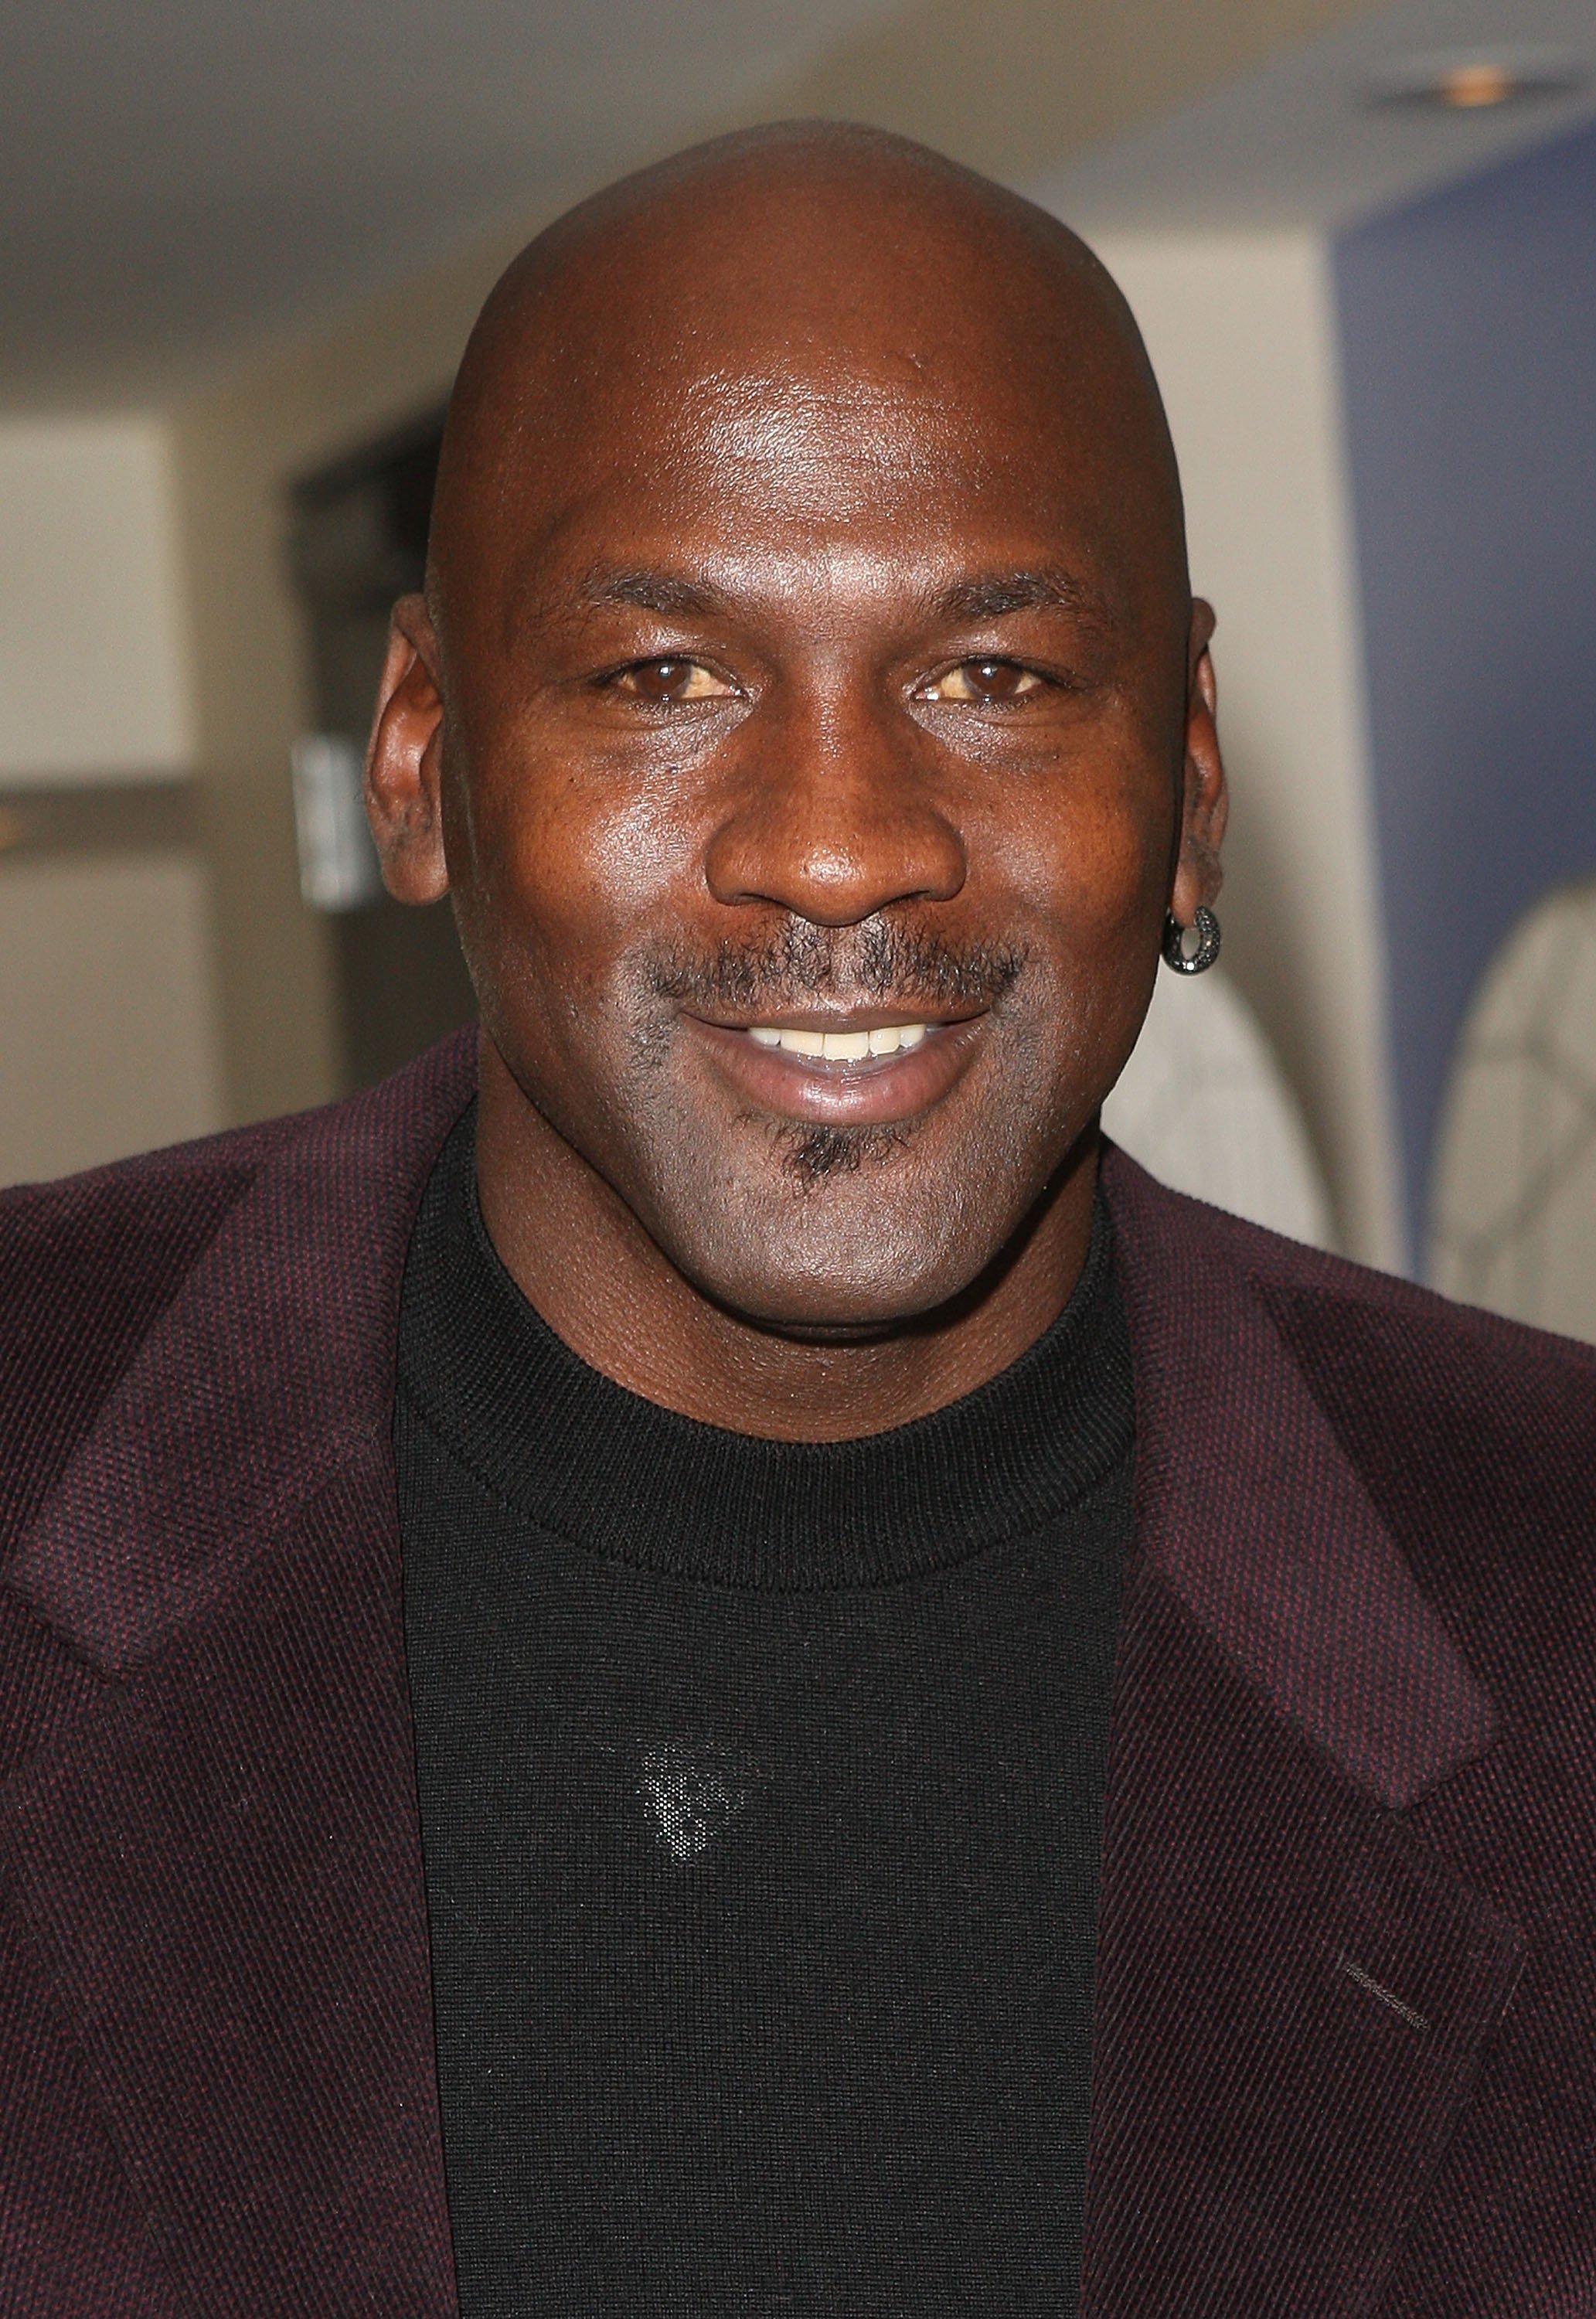 Michael Jordan attends the Jordan Brand at The W Hotel on February 12, 2009, in Phoenix, AZ | Source: Getty Images